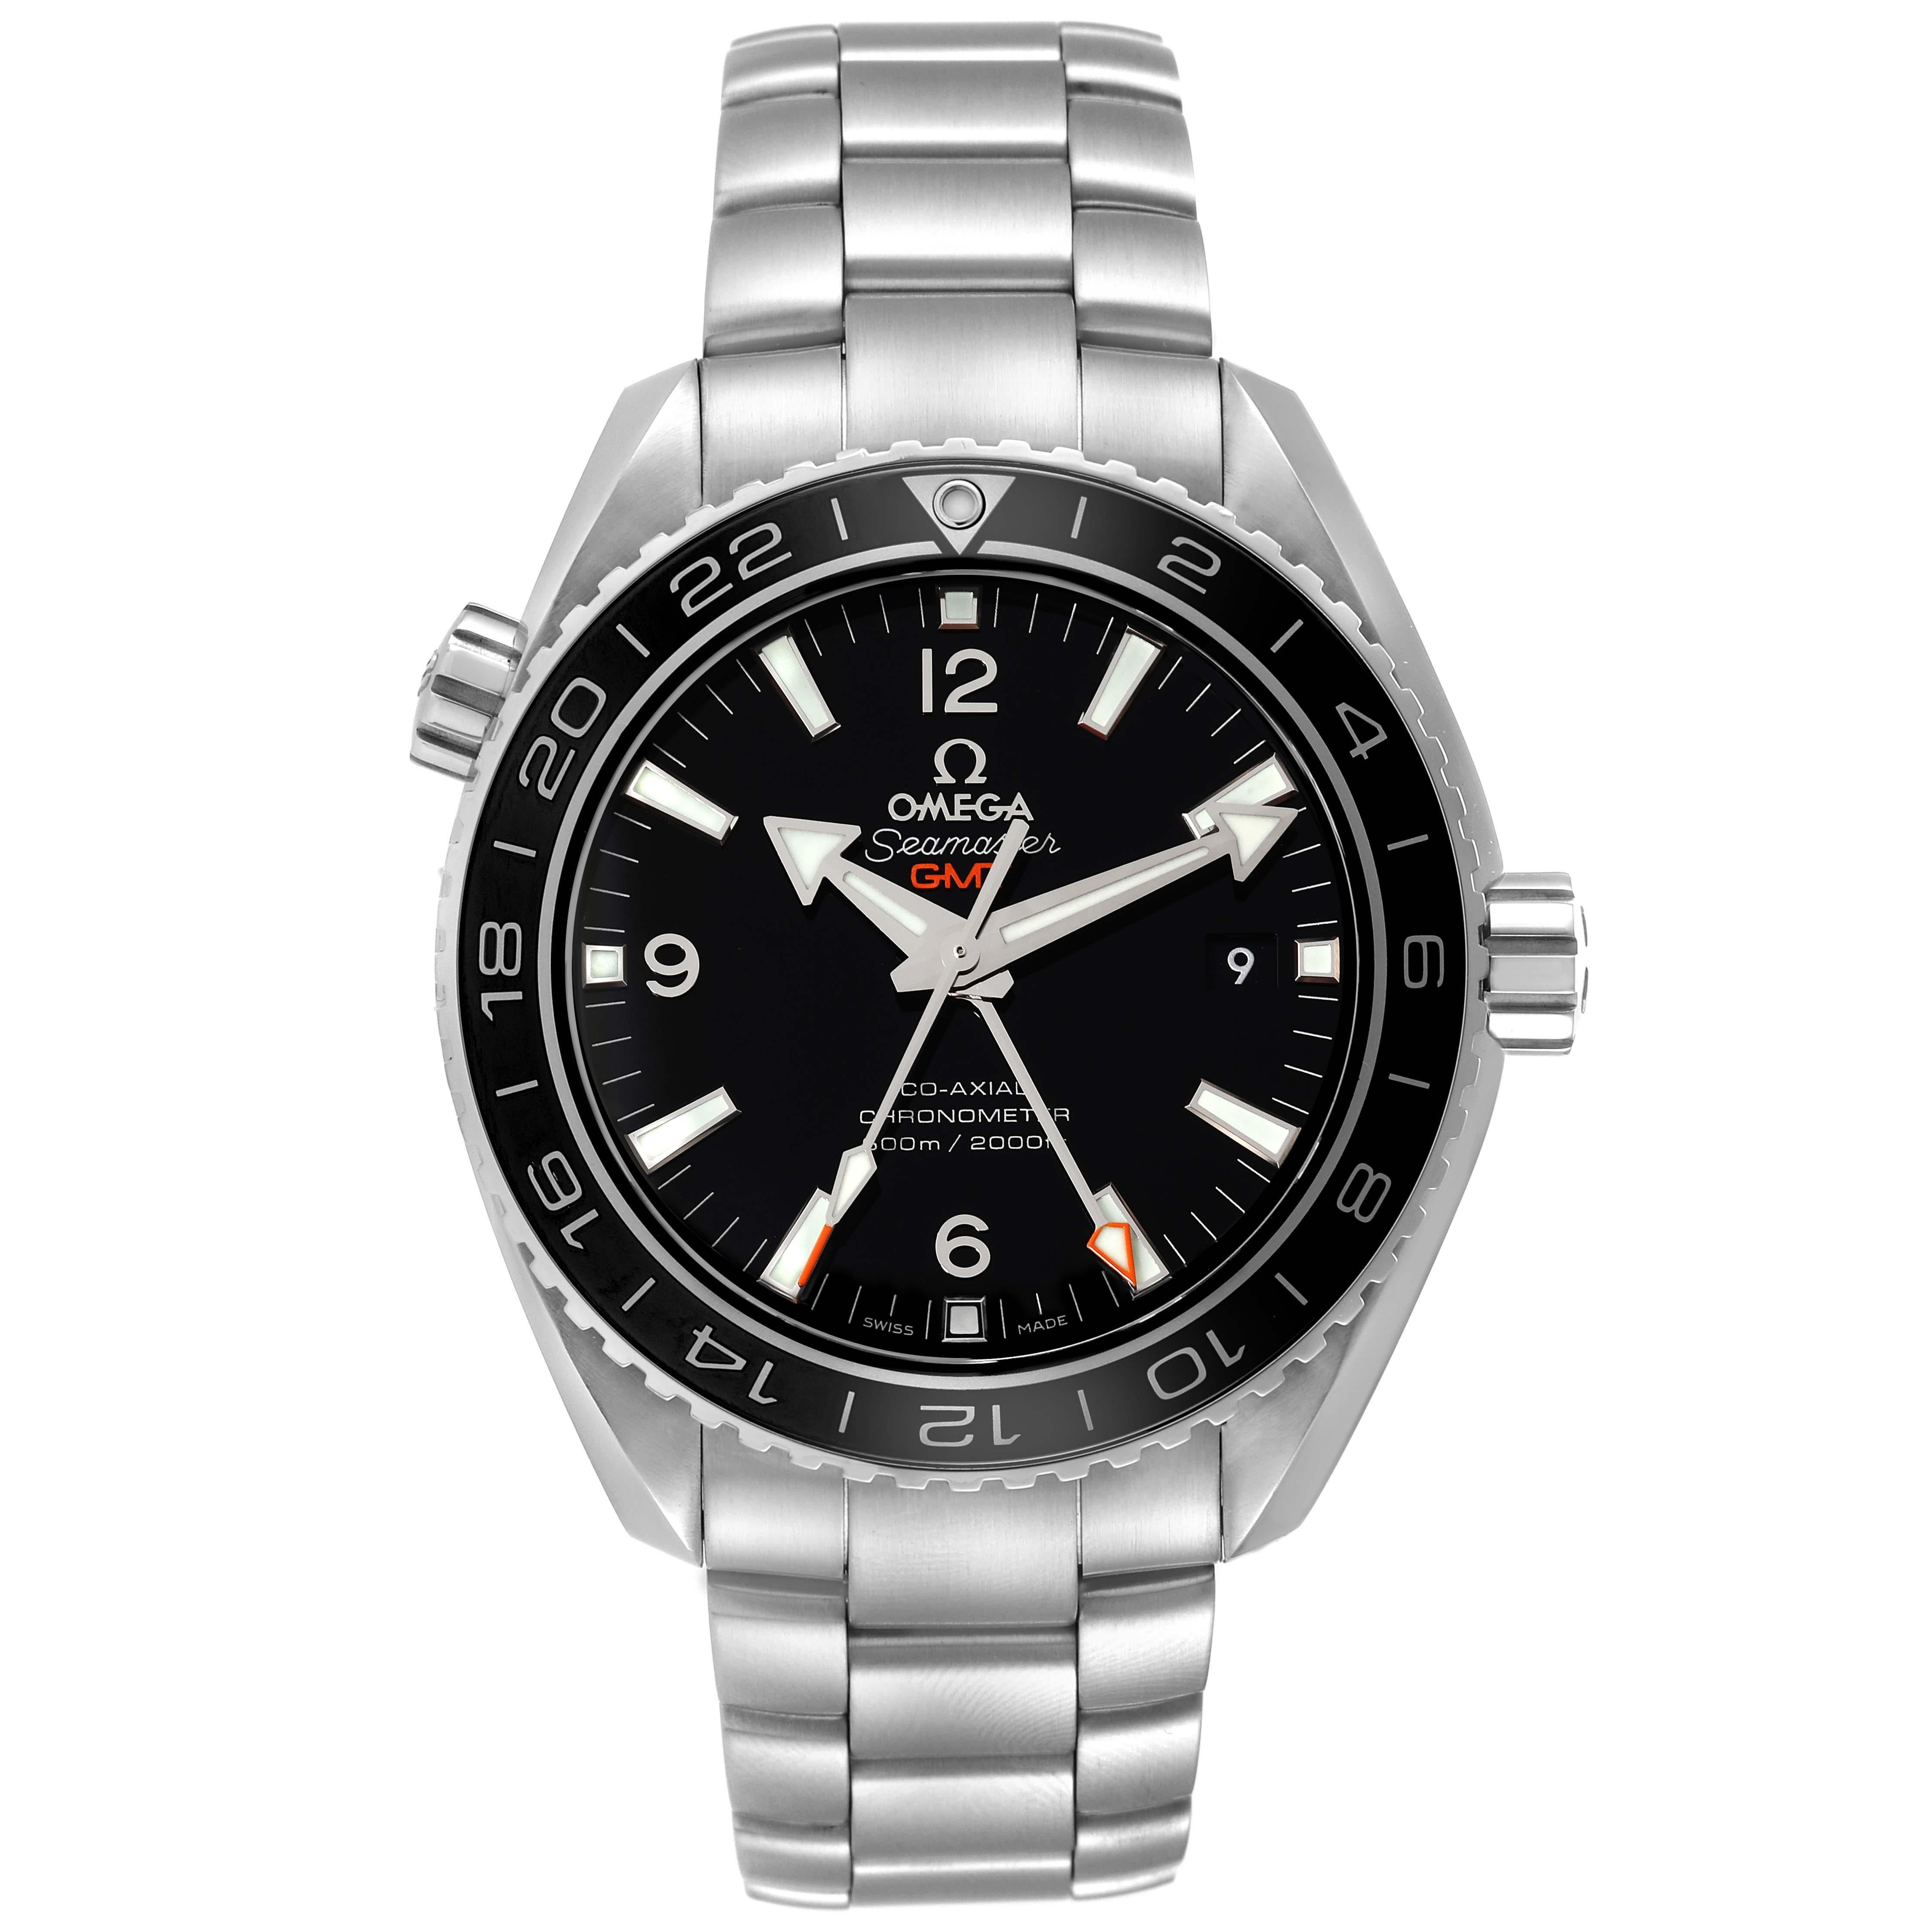 Omega Seamaster Planet Ocean Steel Mens Watch 232.30.44.22.01.001 Box Card. Automatic self-winding chronometer movement with Co-Axial Escapement for greater precision, stability and durability. GMT with time zone function. Silicon balance-spring on